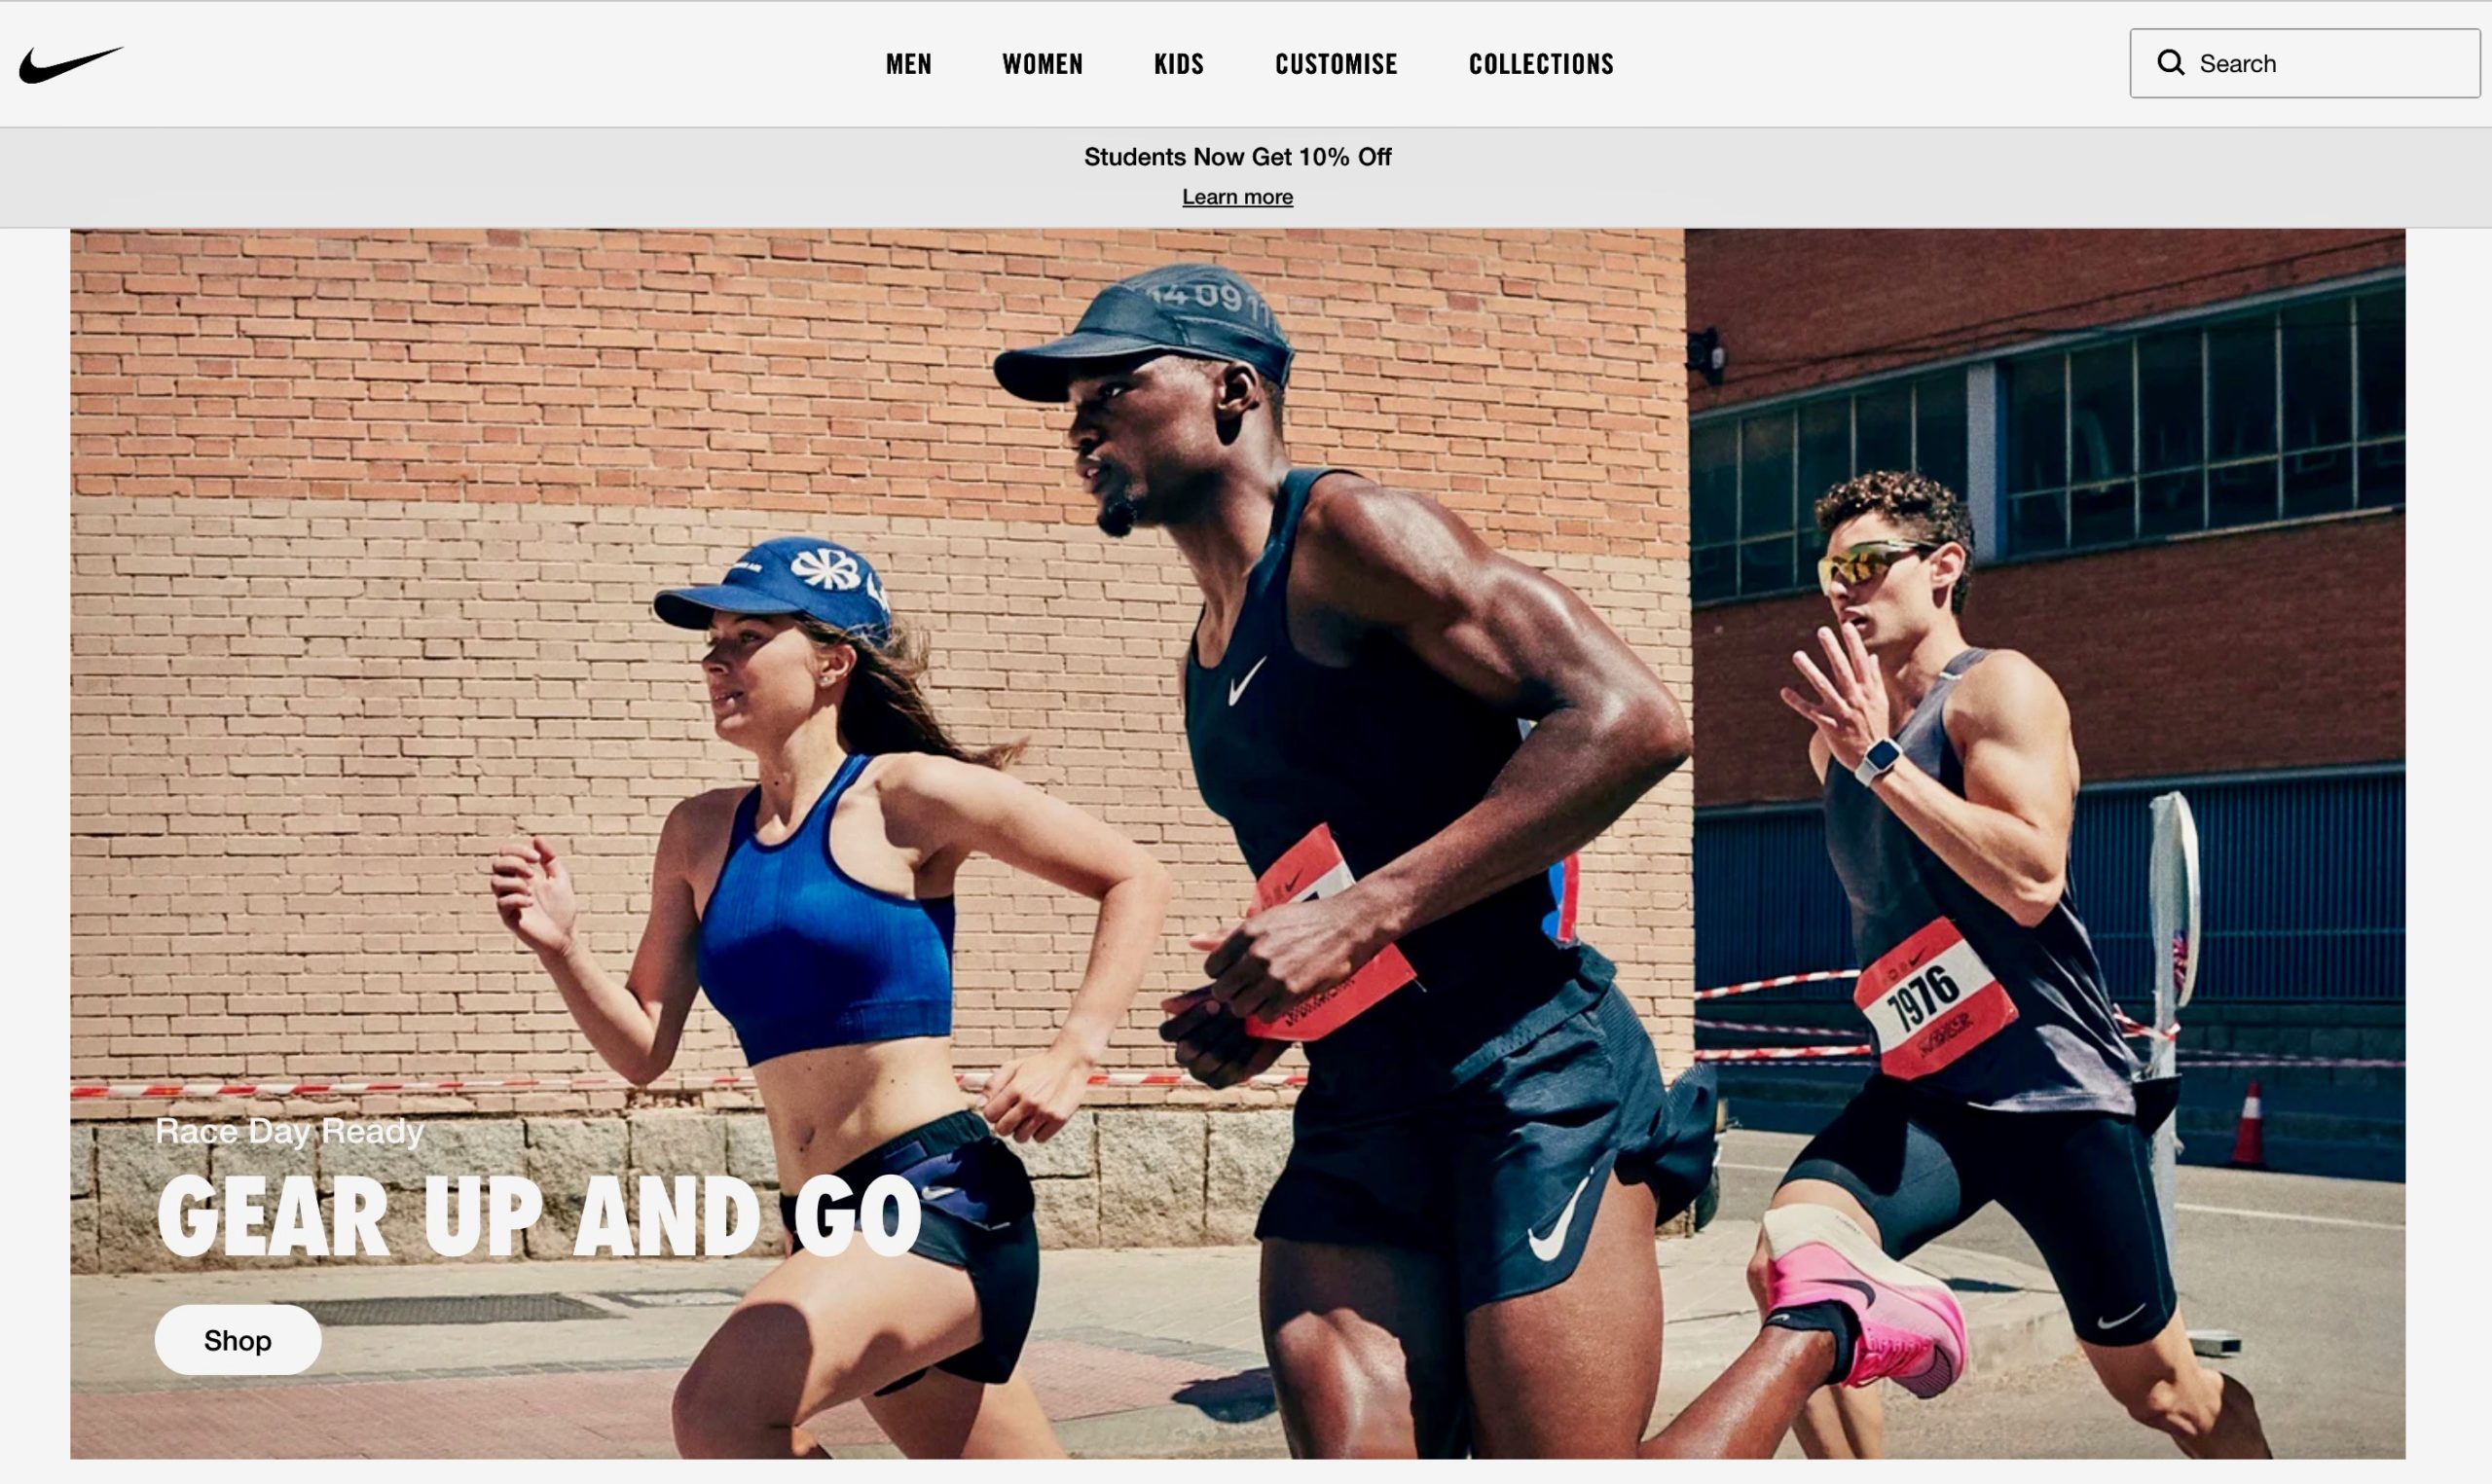 Nike landing page example uses deictic gaze in visuals by showing people running toward the shop button.